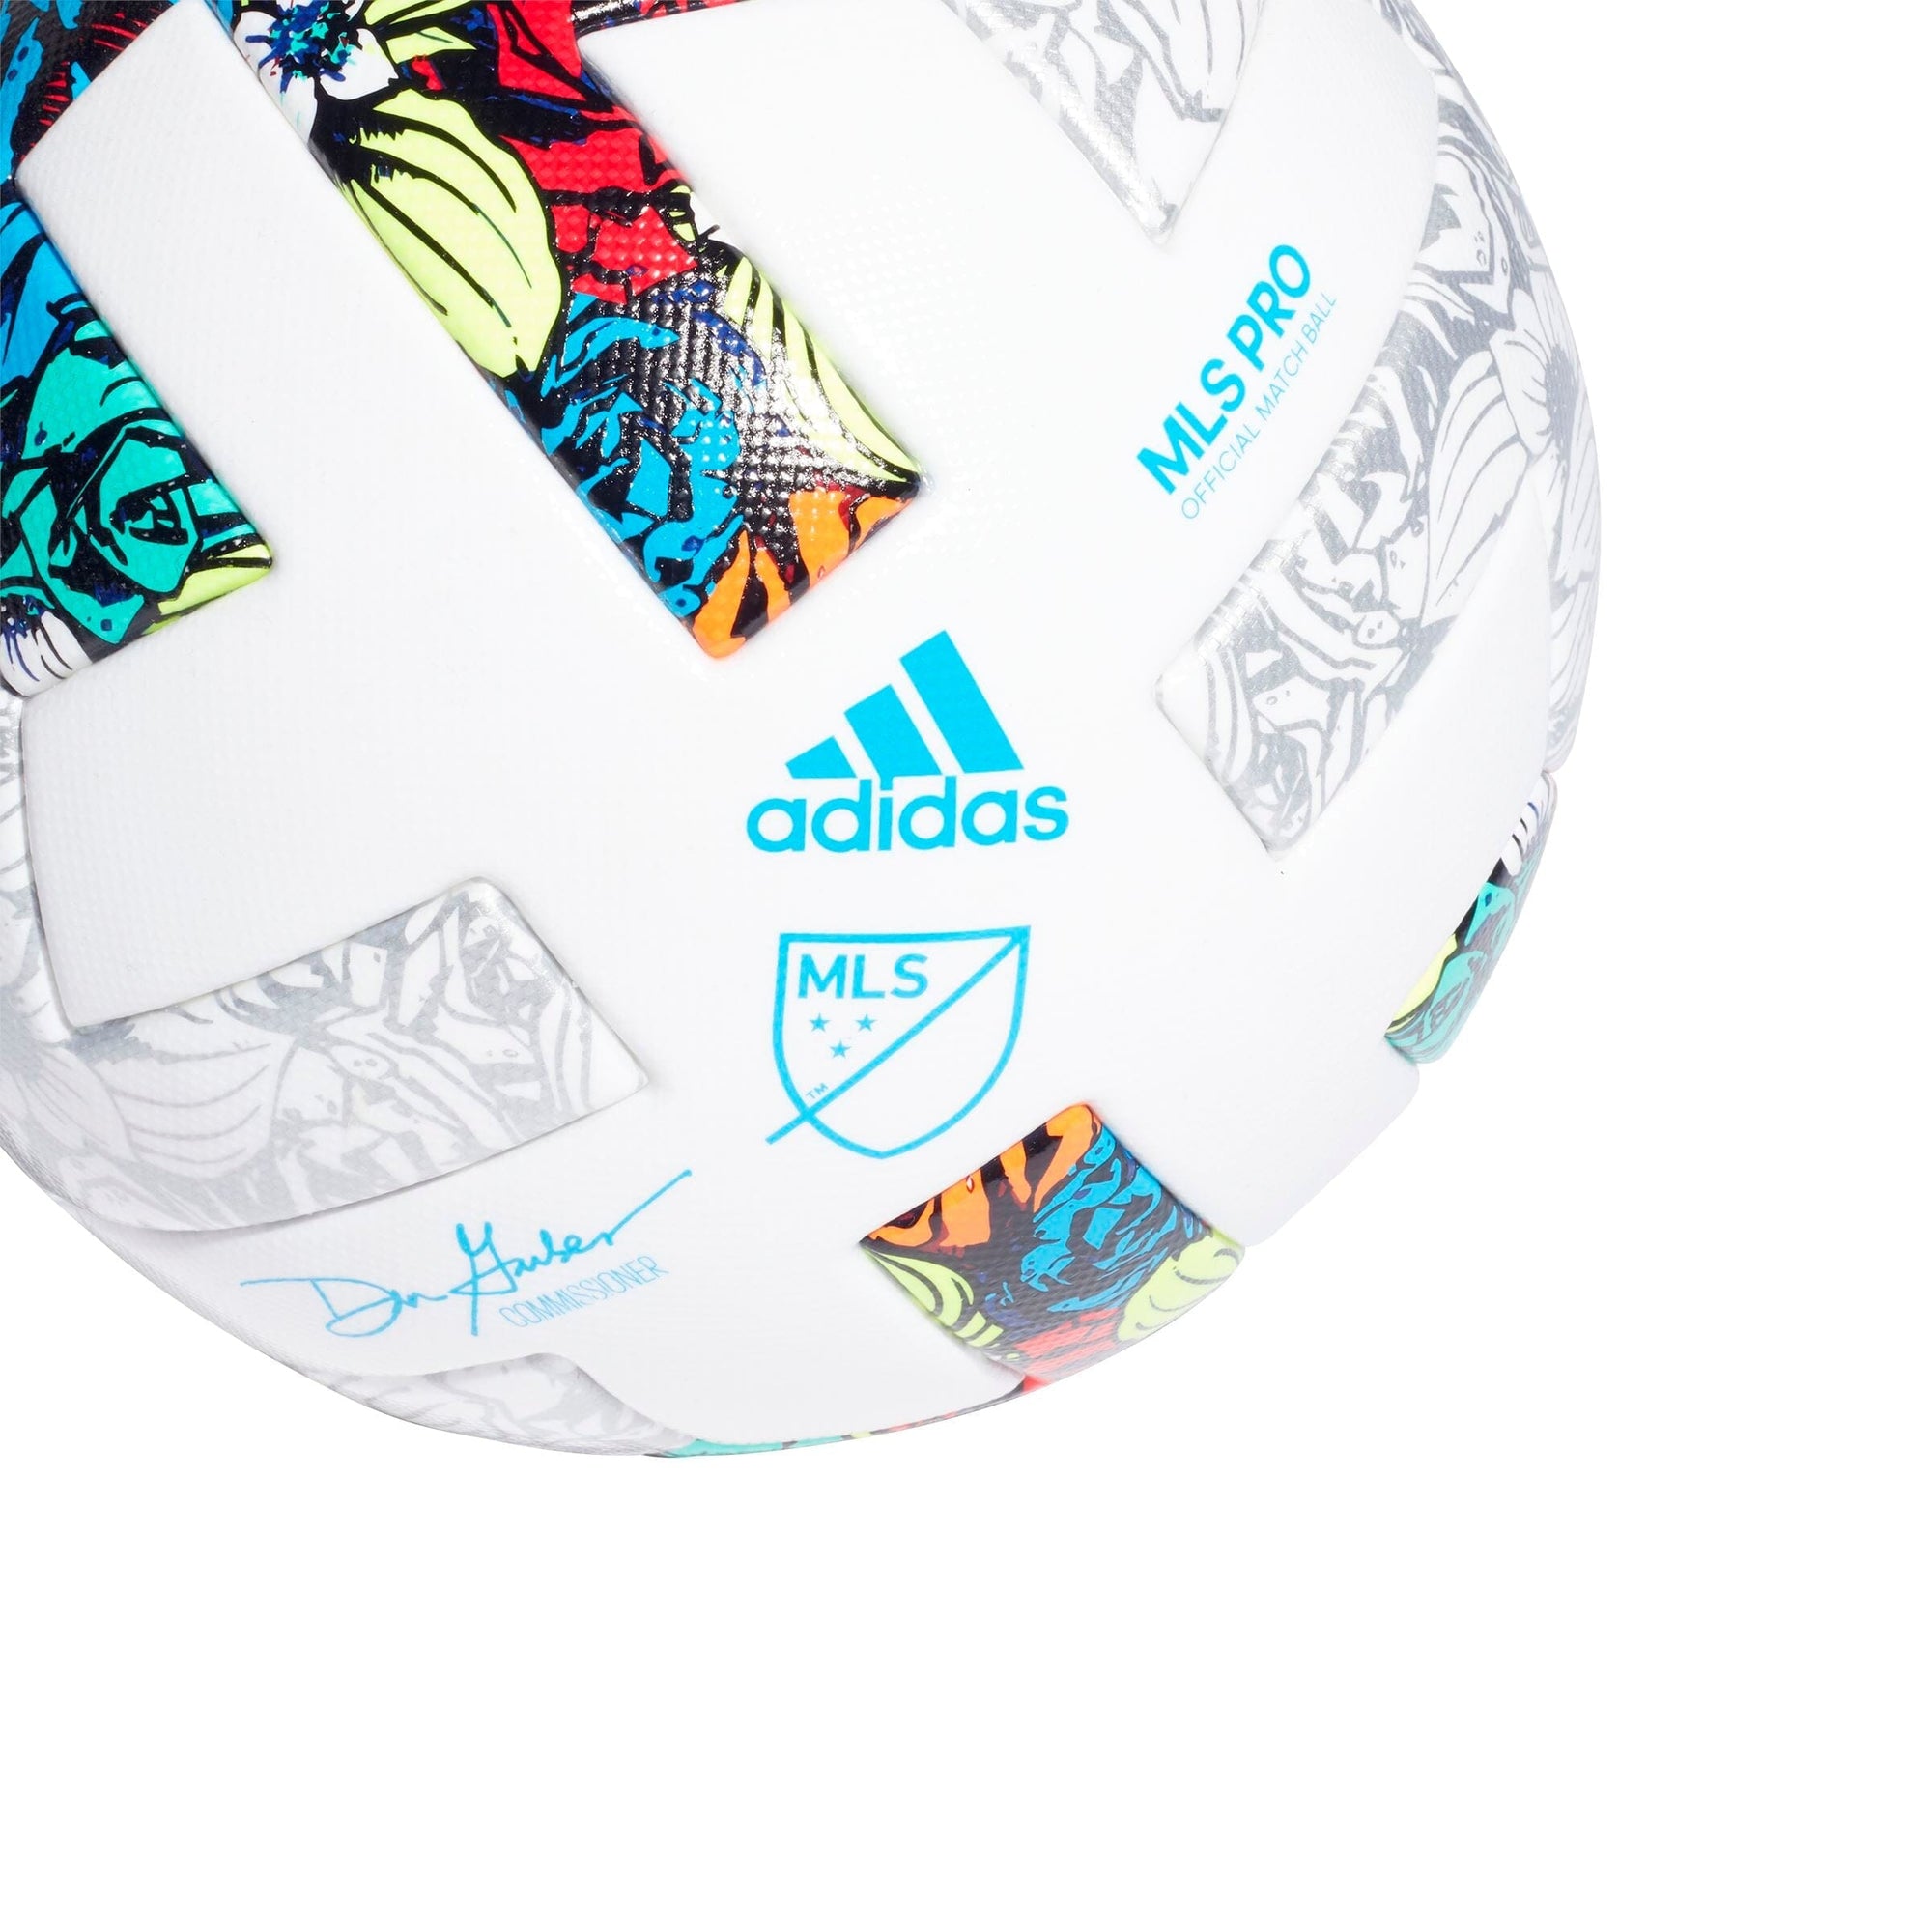 adidas MLS Pro Match Ball 2022 White/Multi Color - 6 Pack | H57824 Soccer Ball Adidas 